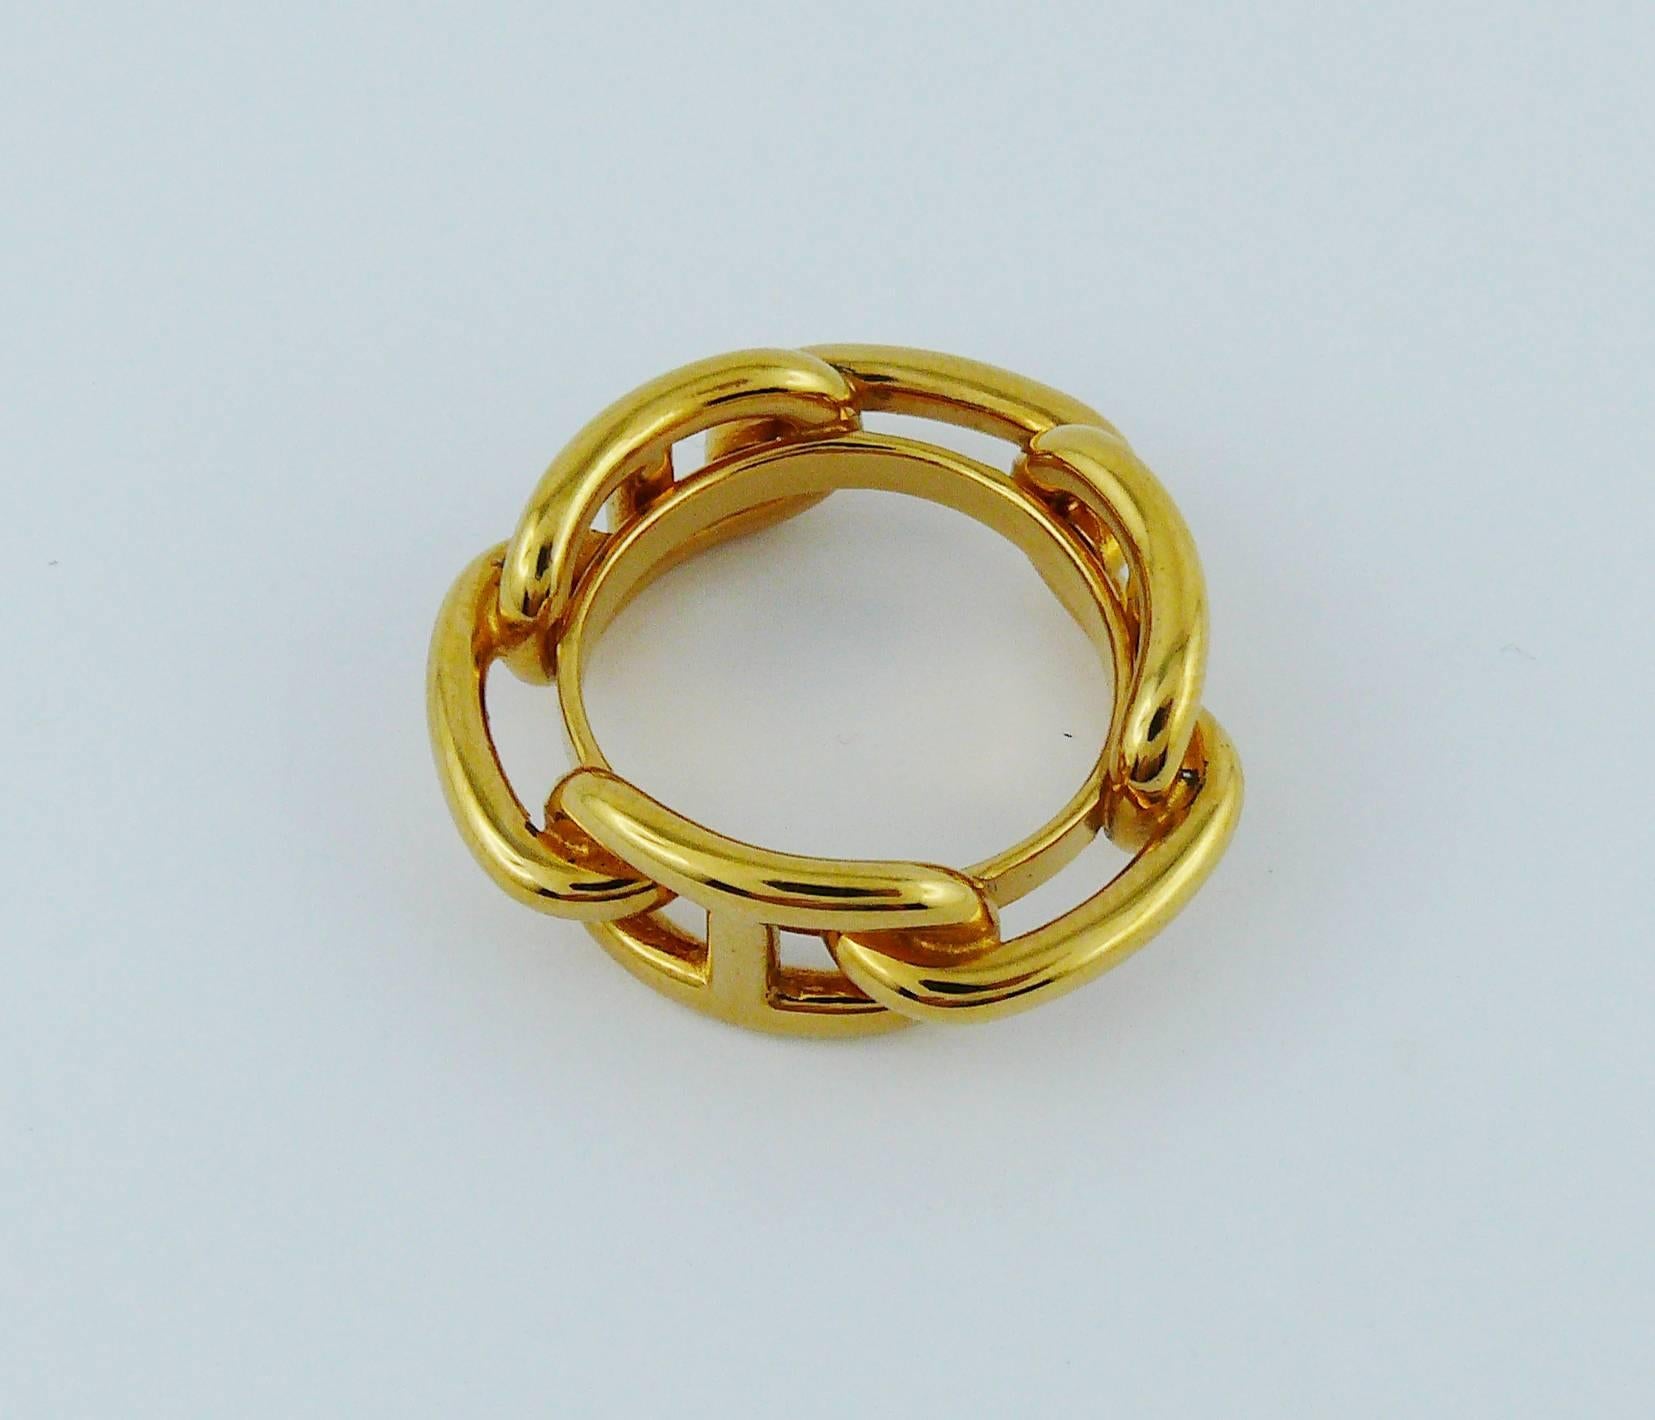 HERMES gold toned CHAINE D'ANCRE scarf ring.

Embossed HERMES.

Indicative measurements : total diameter approx. 2.9 cm (1.14 inches) / inner circumference approx. 6.30 cm (2.48 inches) / width approx. 1 cm (0.39 inch).

JEWELRY CONDITION CHART
-